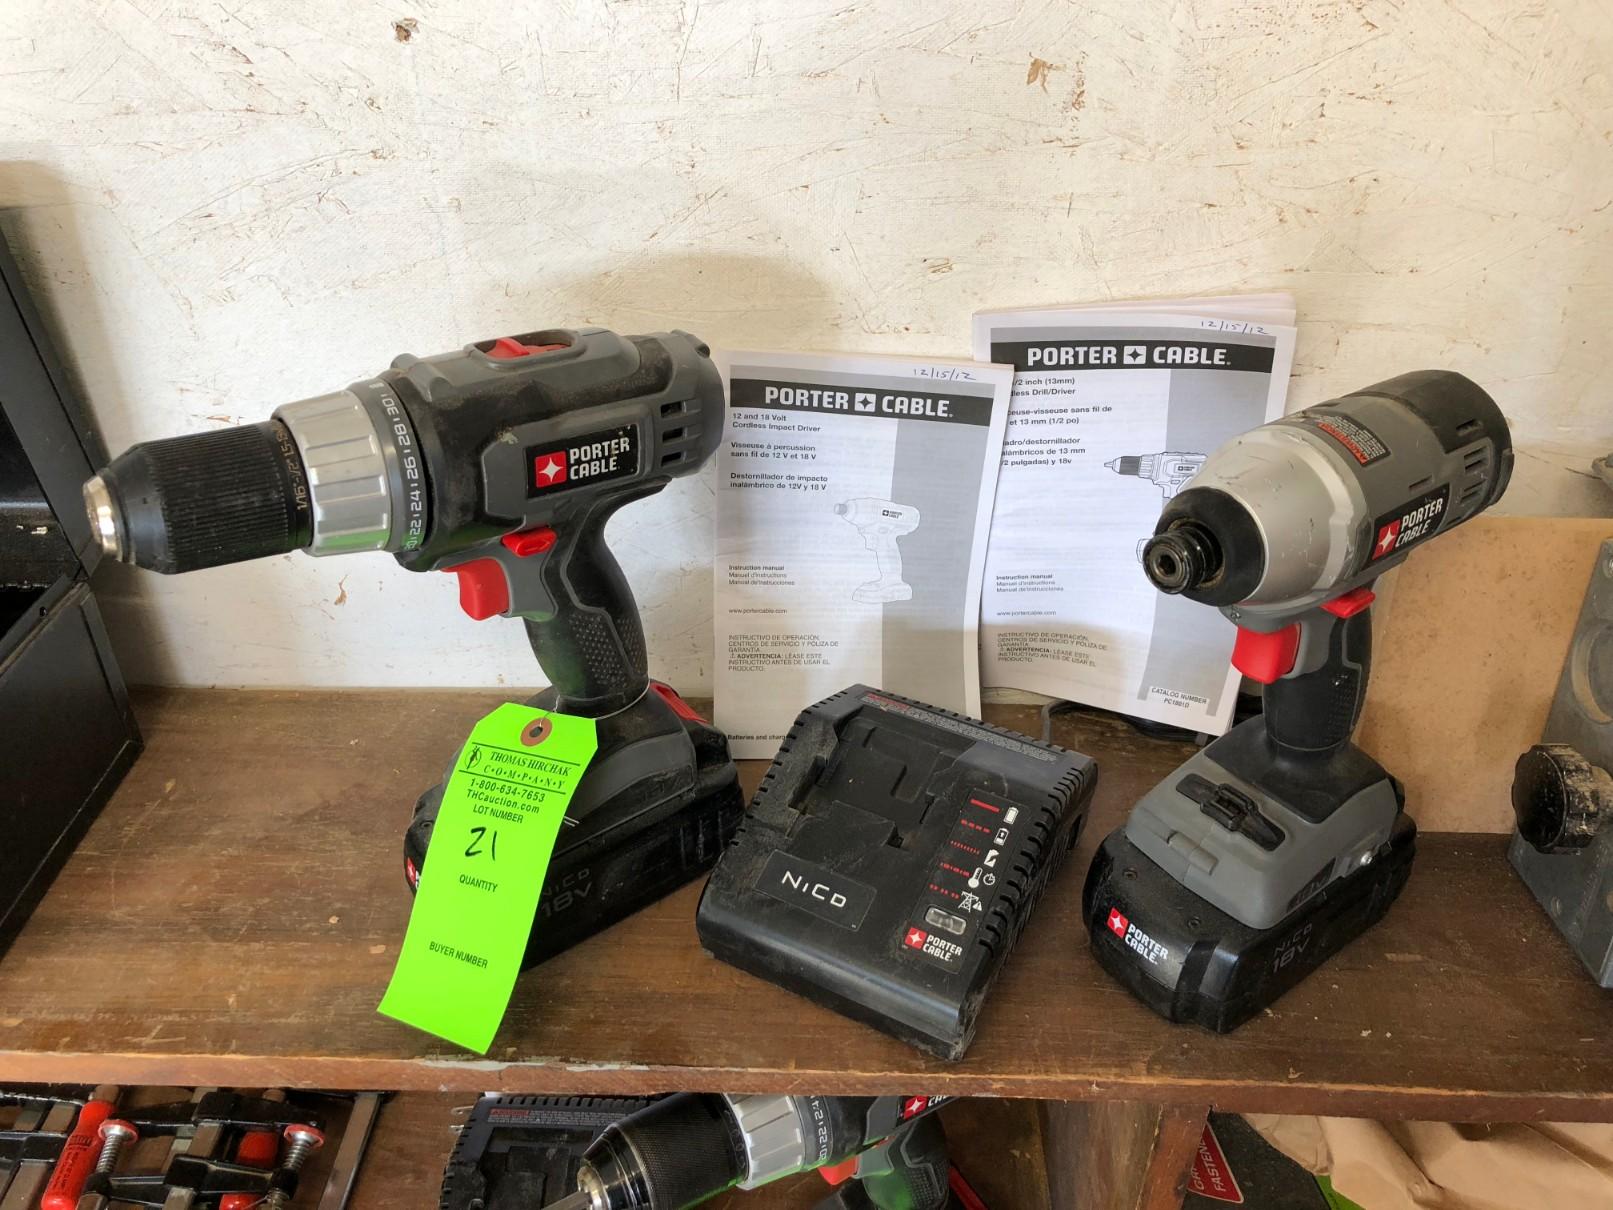 Porter Cable 18v Rechargeable Drill/Driver Set